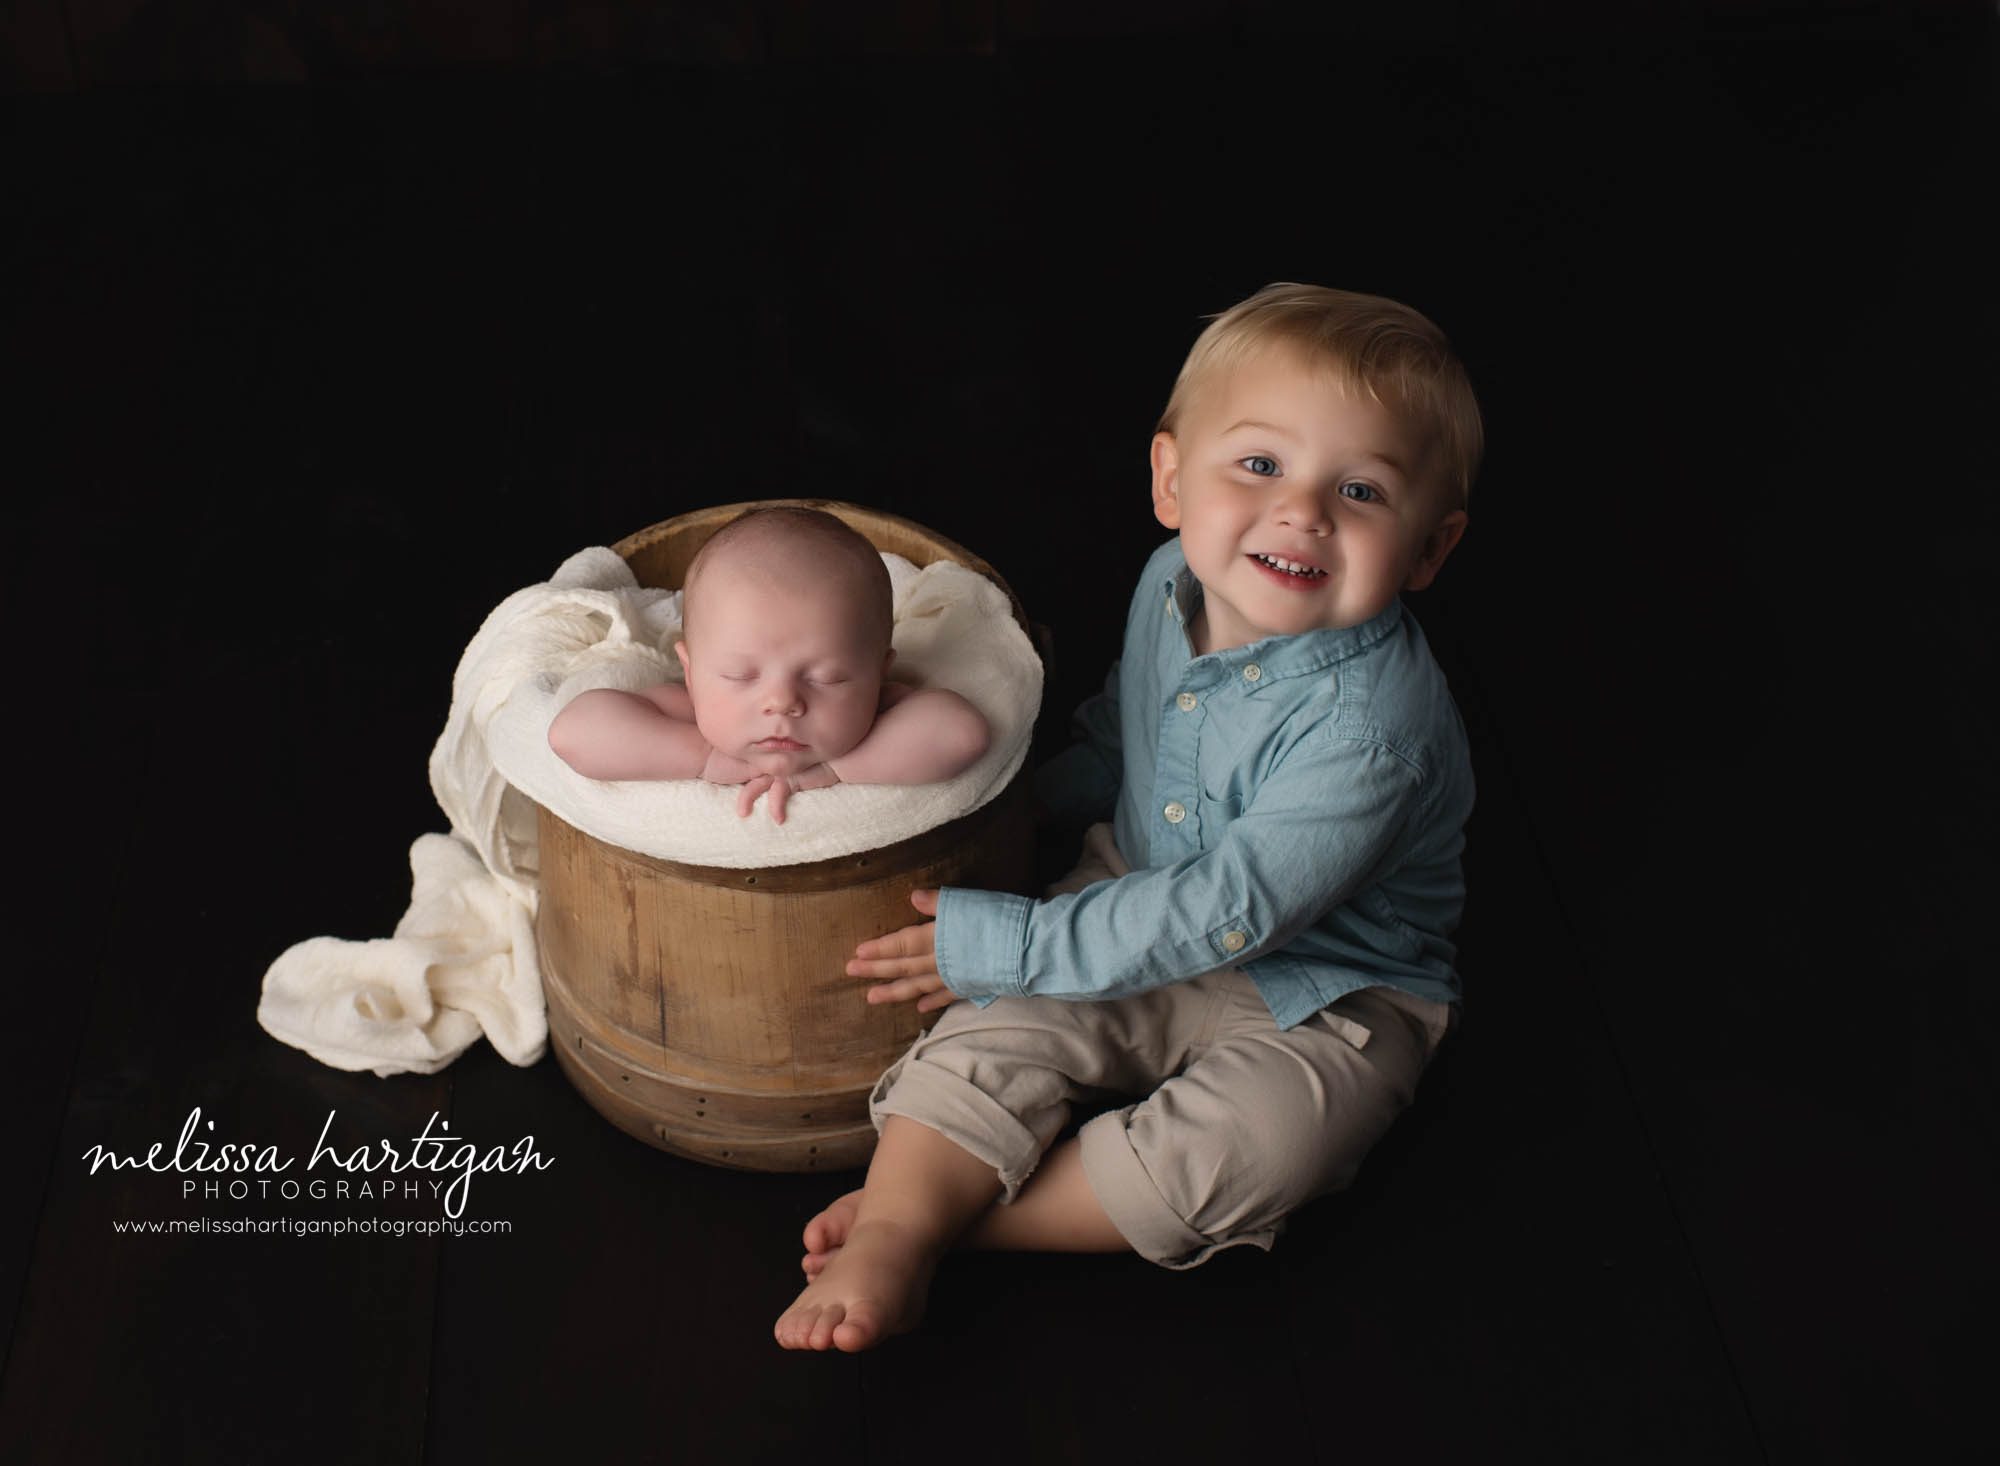 newborn and older sibling sitting next to bucket baby posed in Newborn photography CT